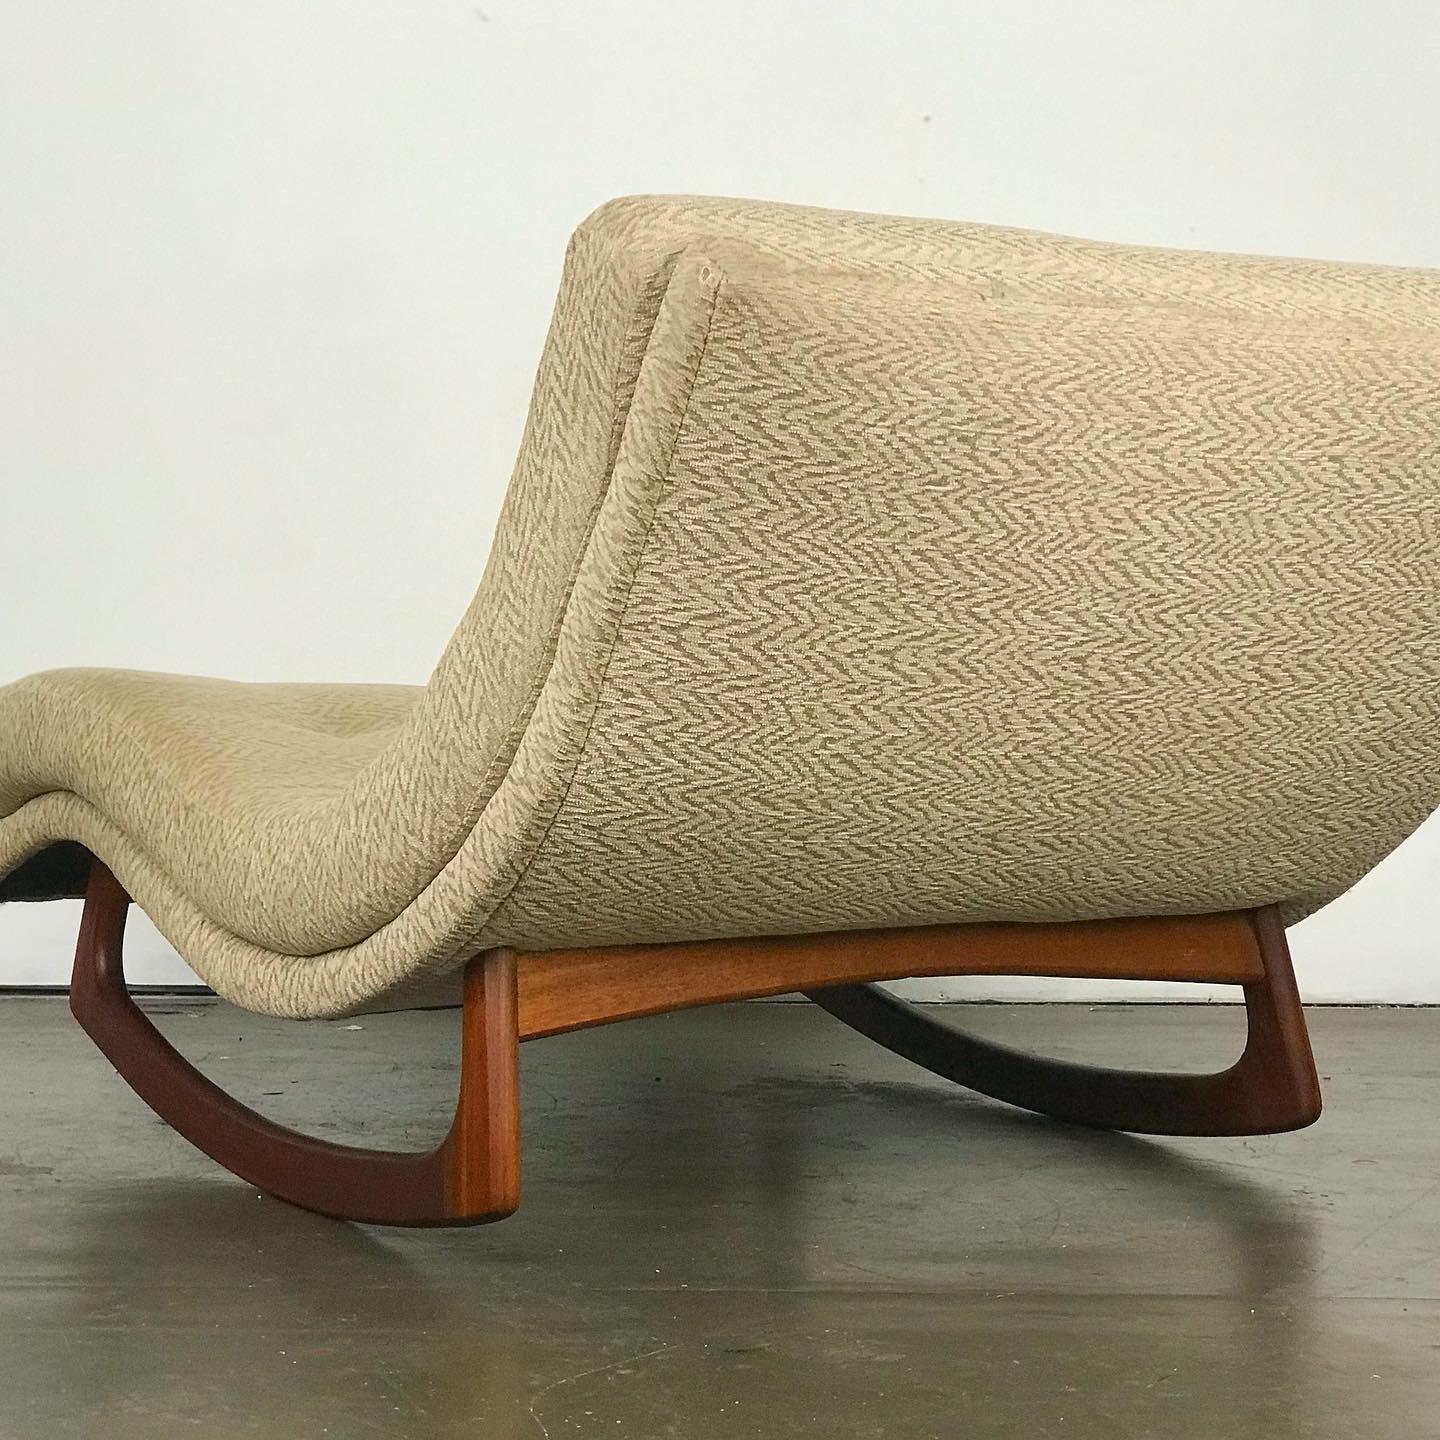 American Rocking Wave Chaise by Adrian Pearsall for Craft Associates